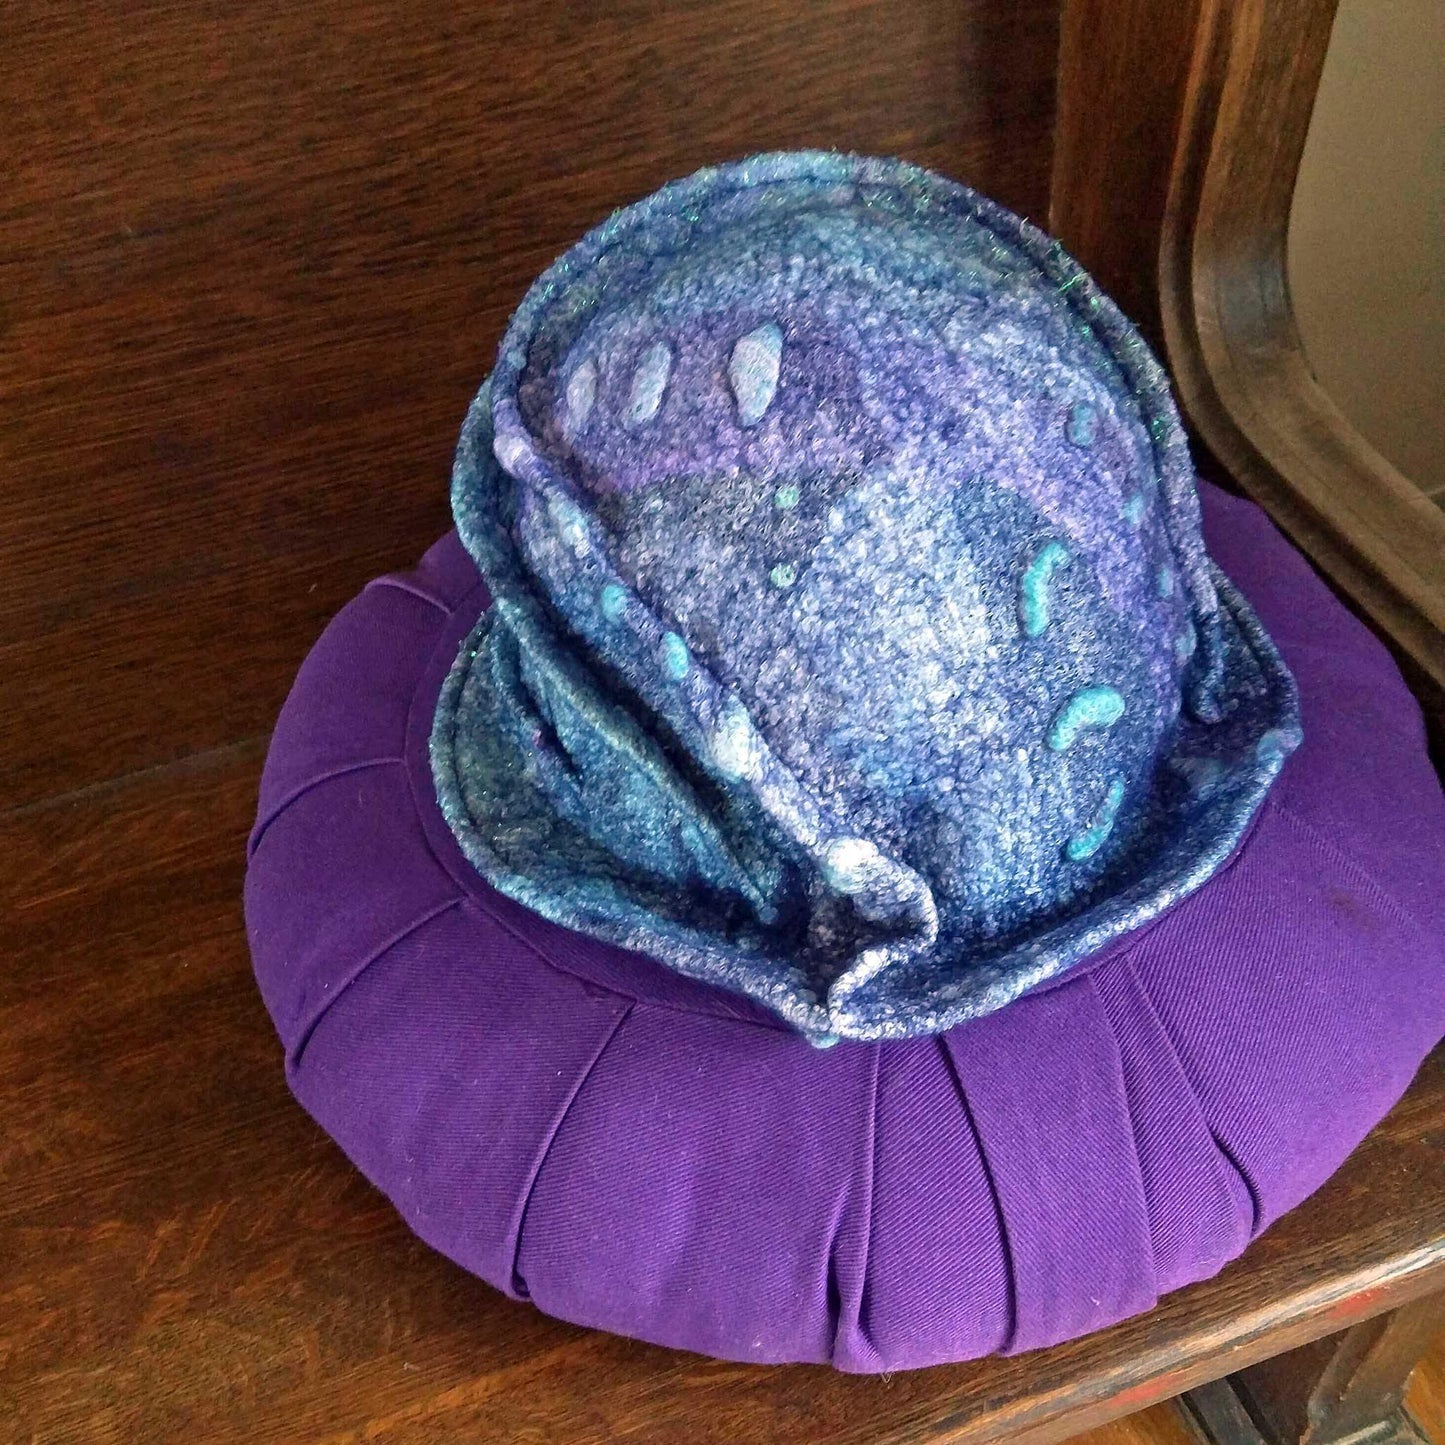 Iridescent Blue Violet Bucket Hat - top view with more accurate colors